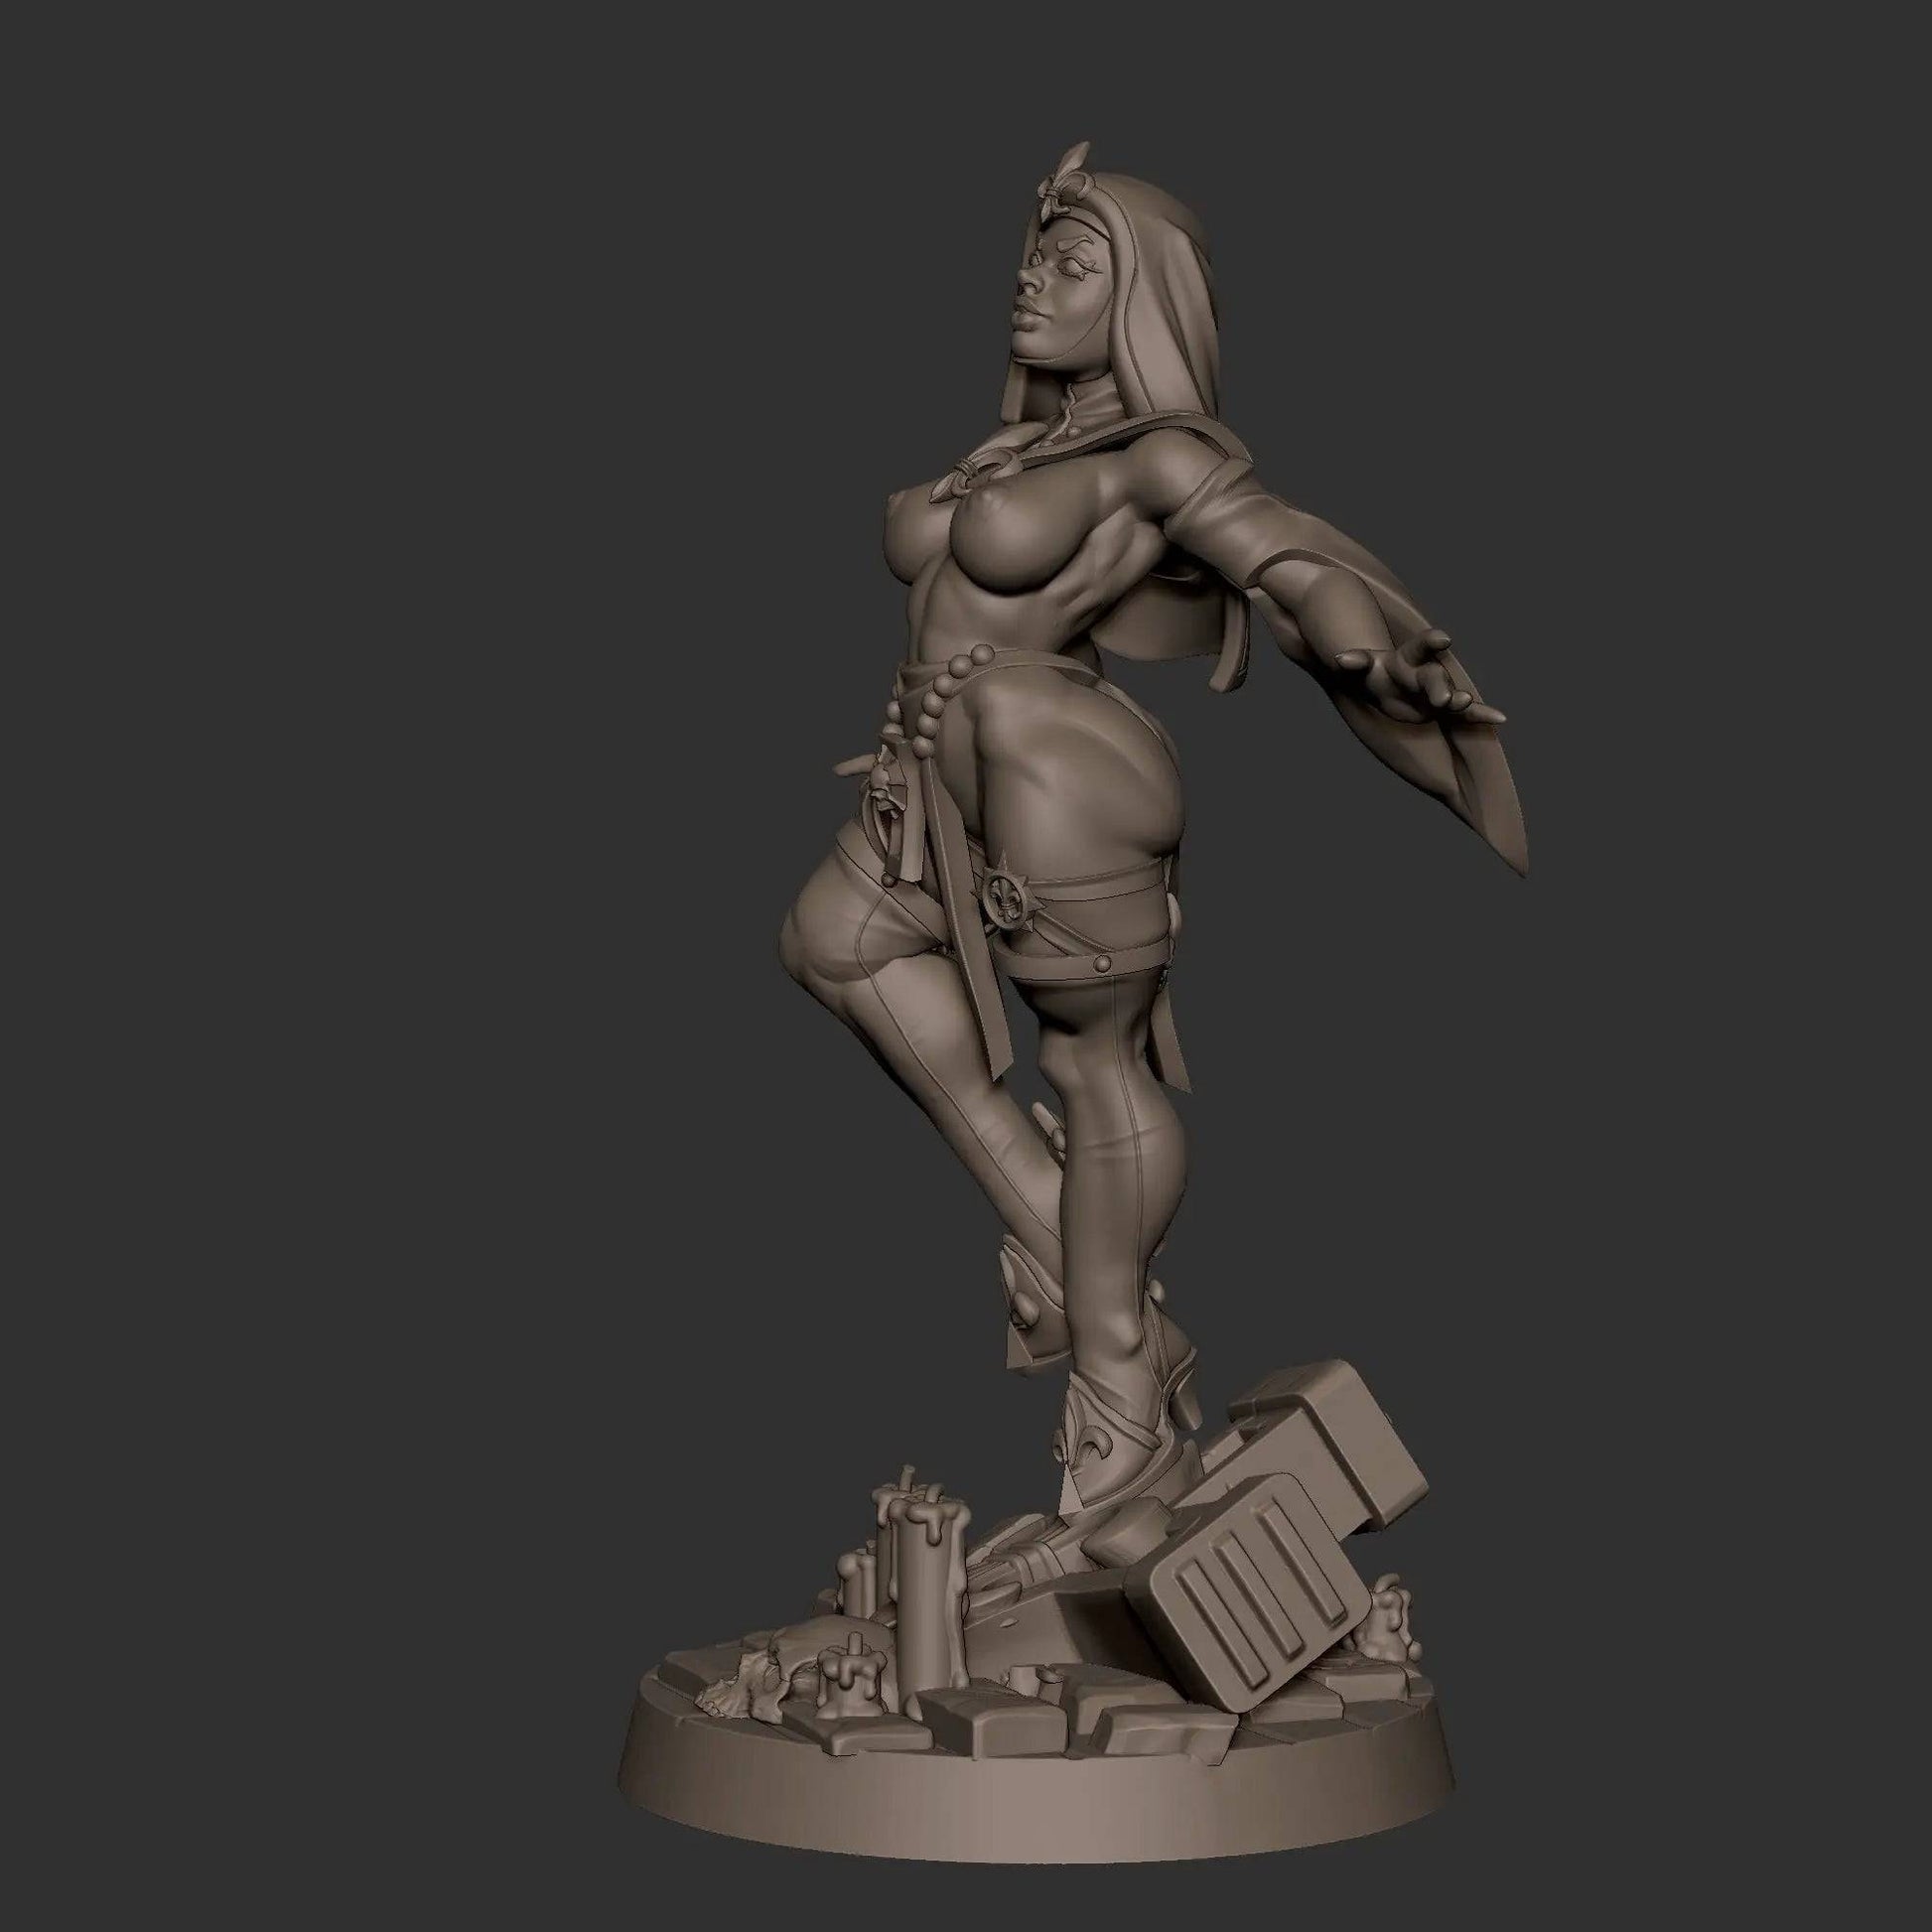 Battle Sisters 2, Pinup SFW NSFW Lovely Woman, Sister of Holy War | D&D Miniature Pinup | Bite the Bullet - Tattles Told 3D